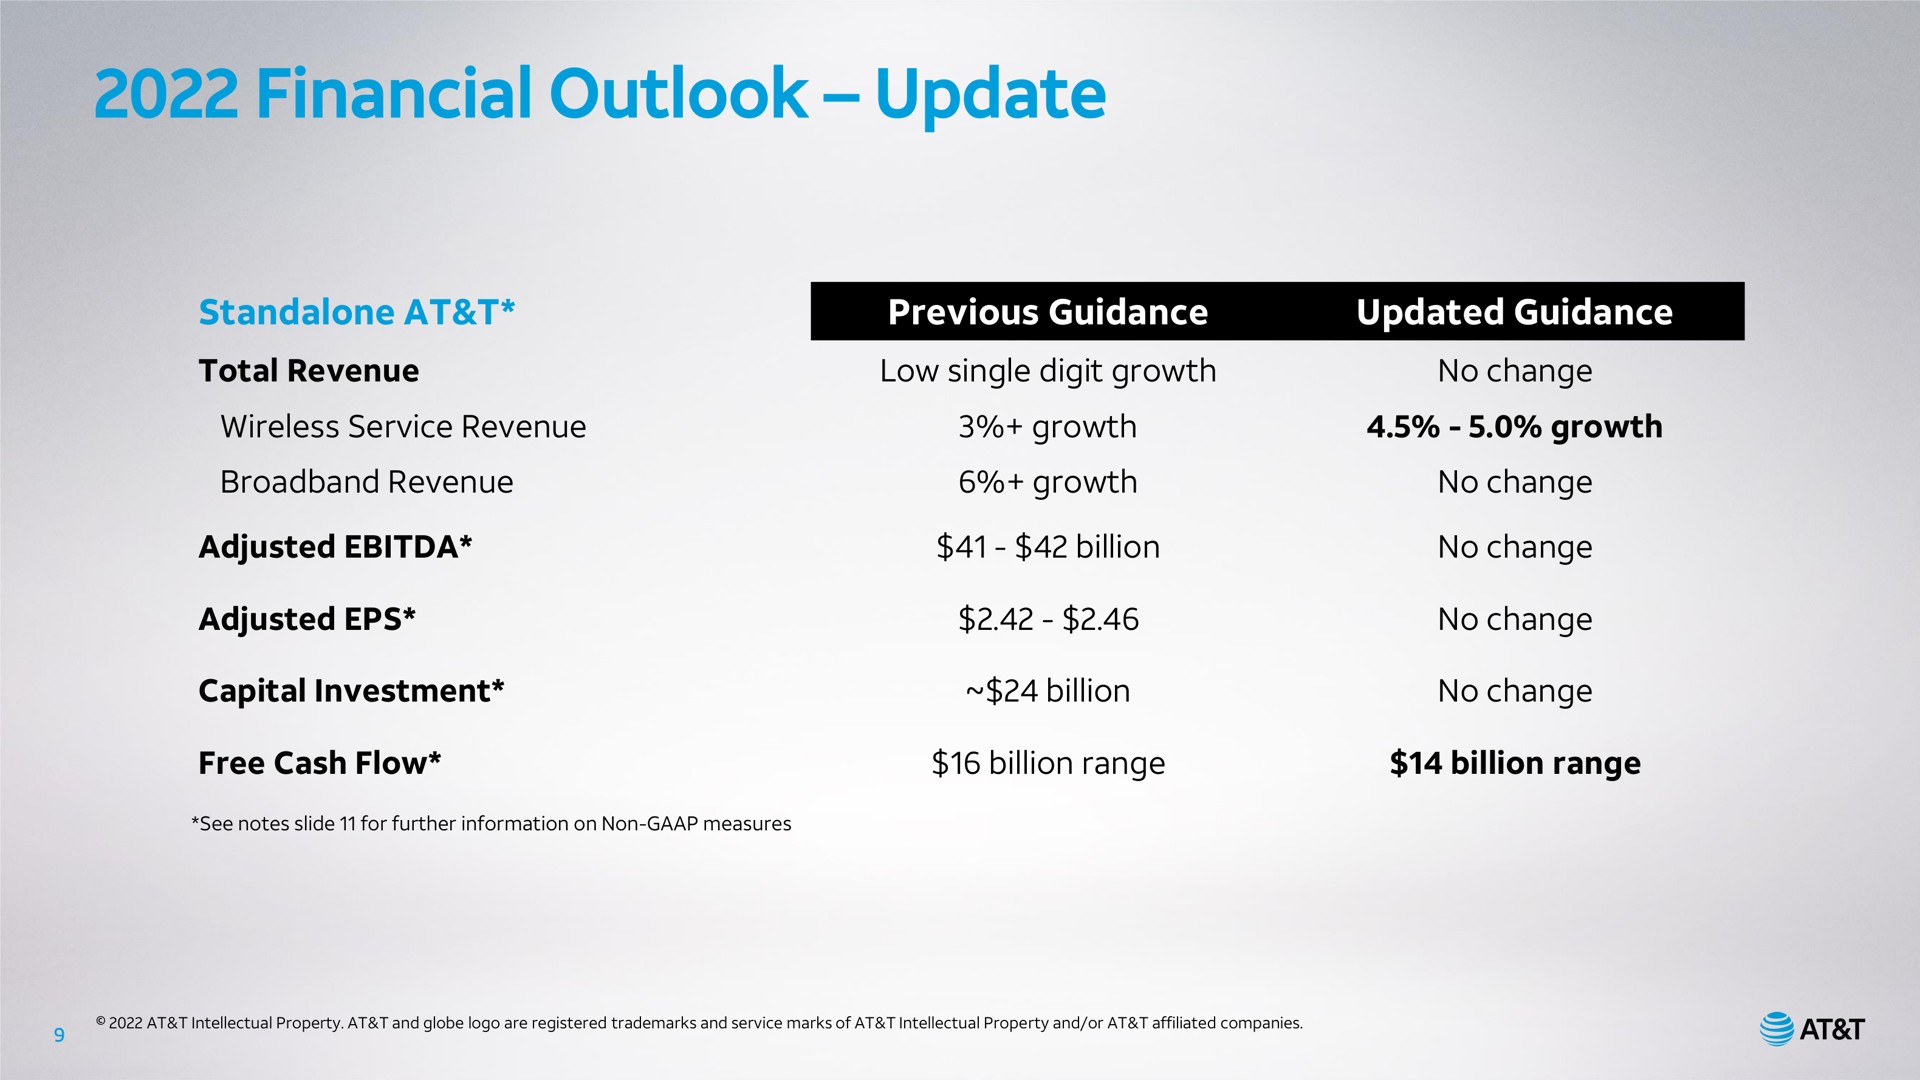 financial outlook update at total revenue wireless service revenue revenue adjusted adjusted capital investment free cash flow previous guidance updated guidance low single digit growth no change growth growth billion billion growth no change no change no change no change billion range billion range | AT&T